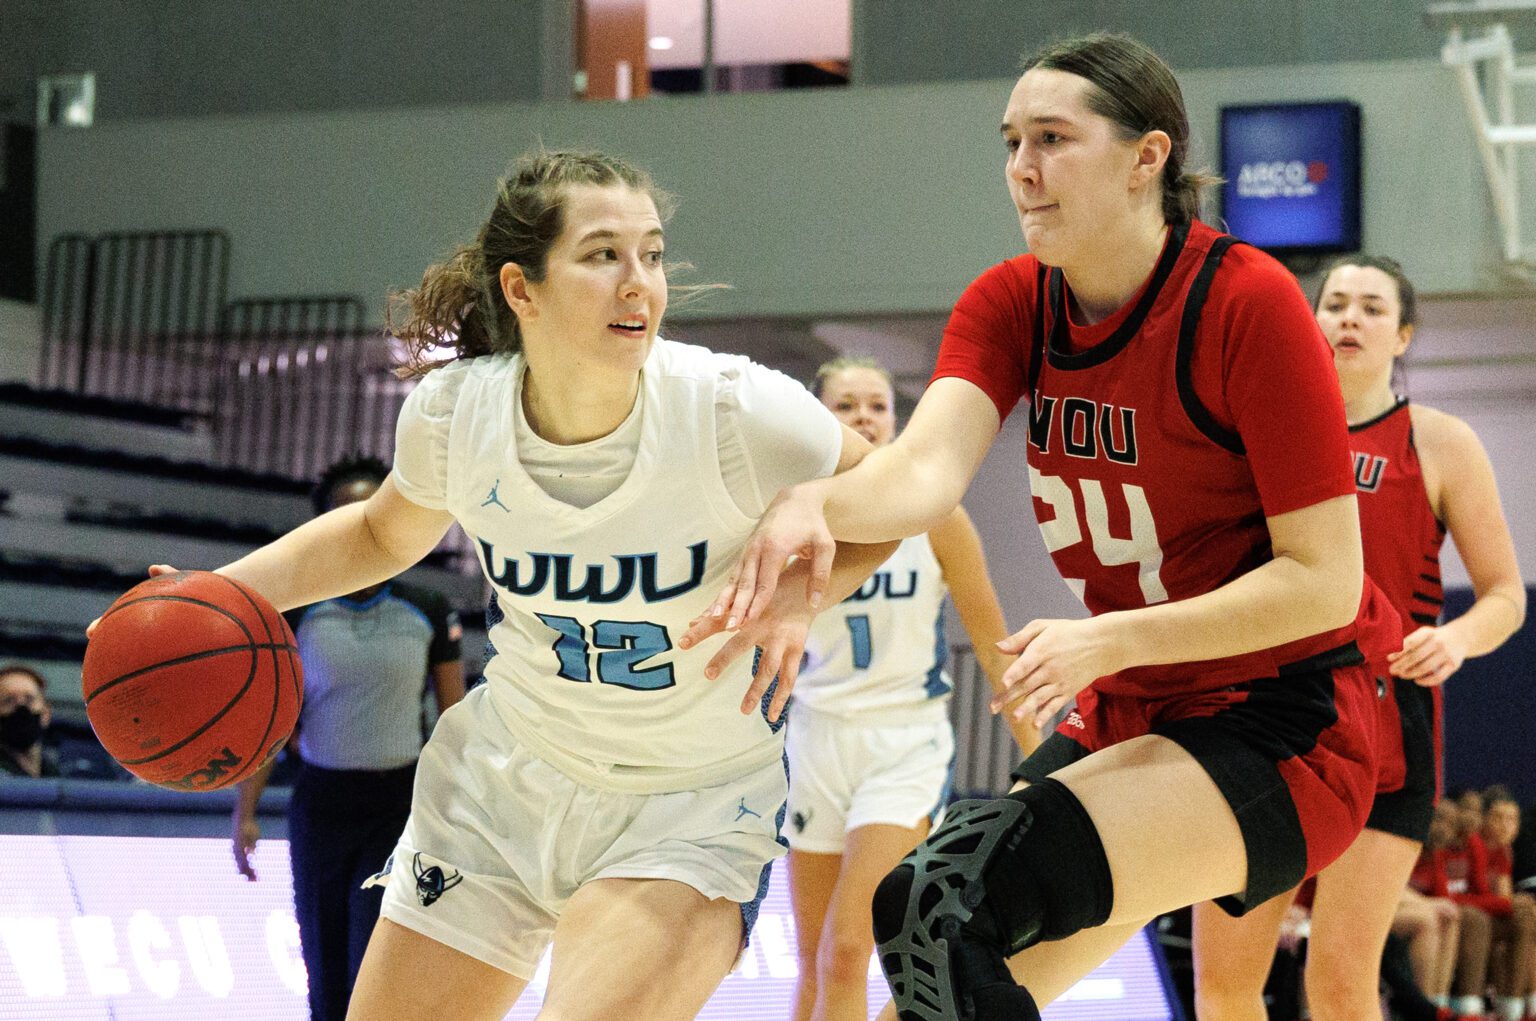 Senior guard Emma Duff leads the Western Vikings women's squad into the Elite Eight of the NCAA Division II tournament against Valdosta State on Monday.